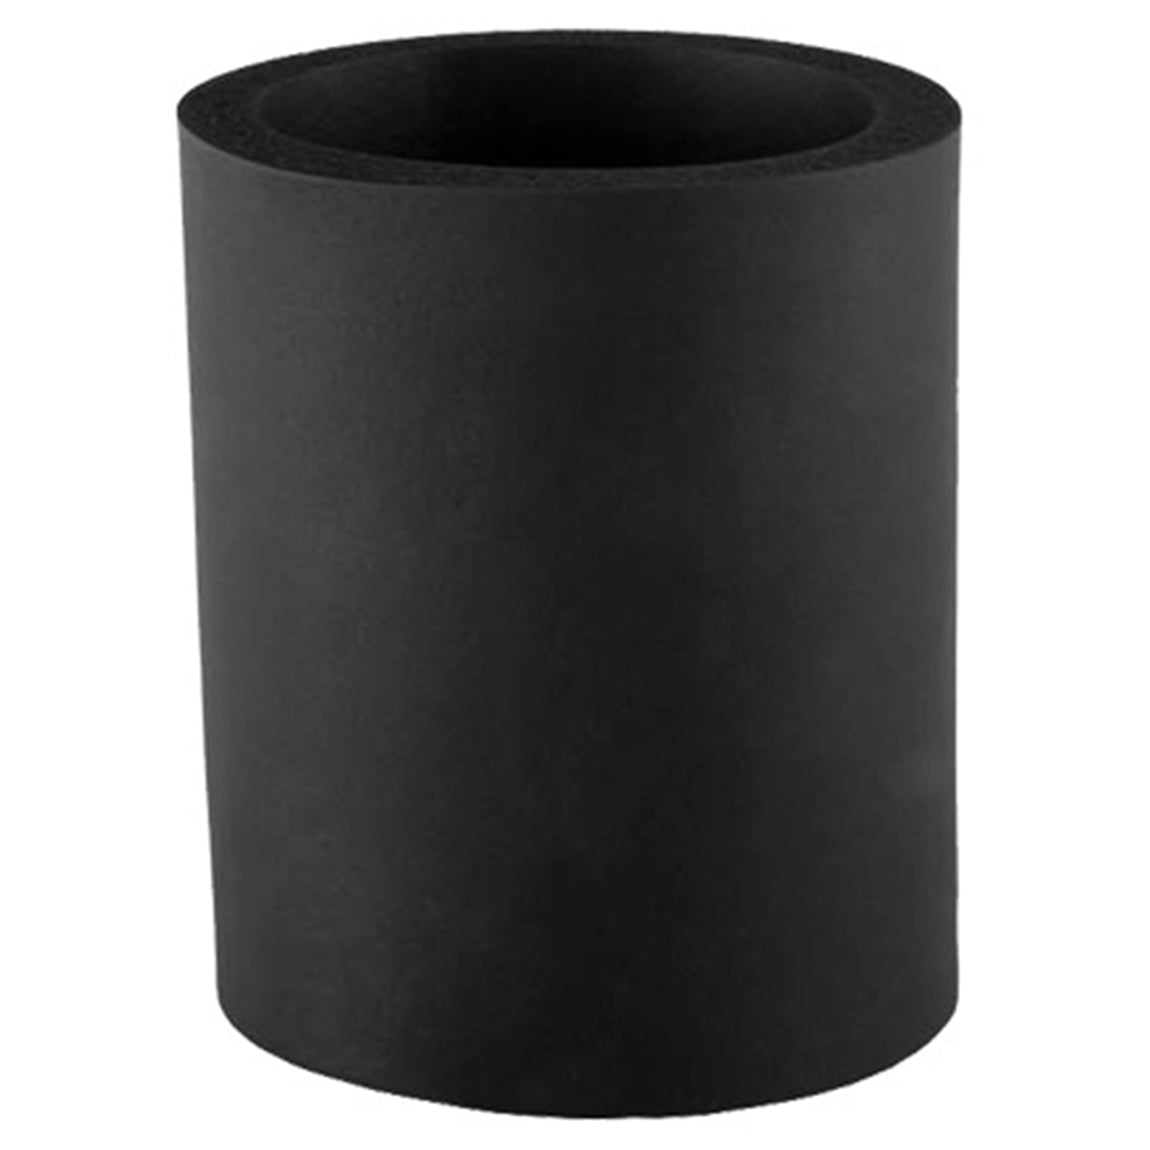 FoamZone Can Hugger with 3/8" Thick Foam